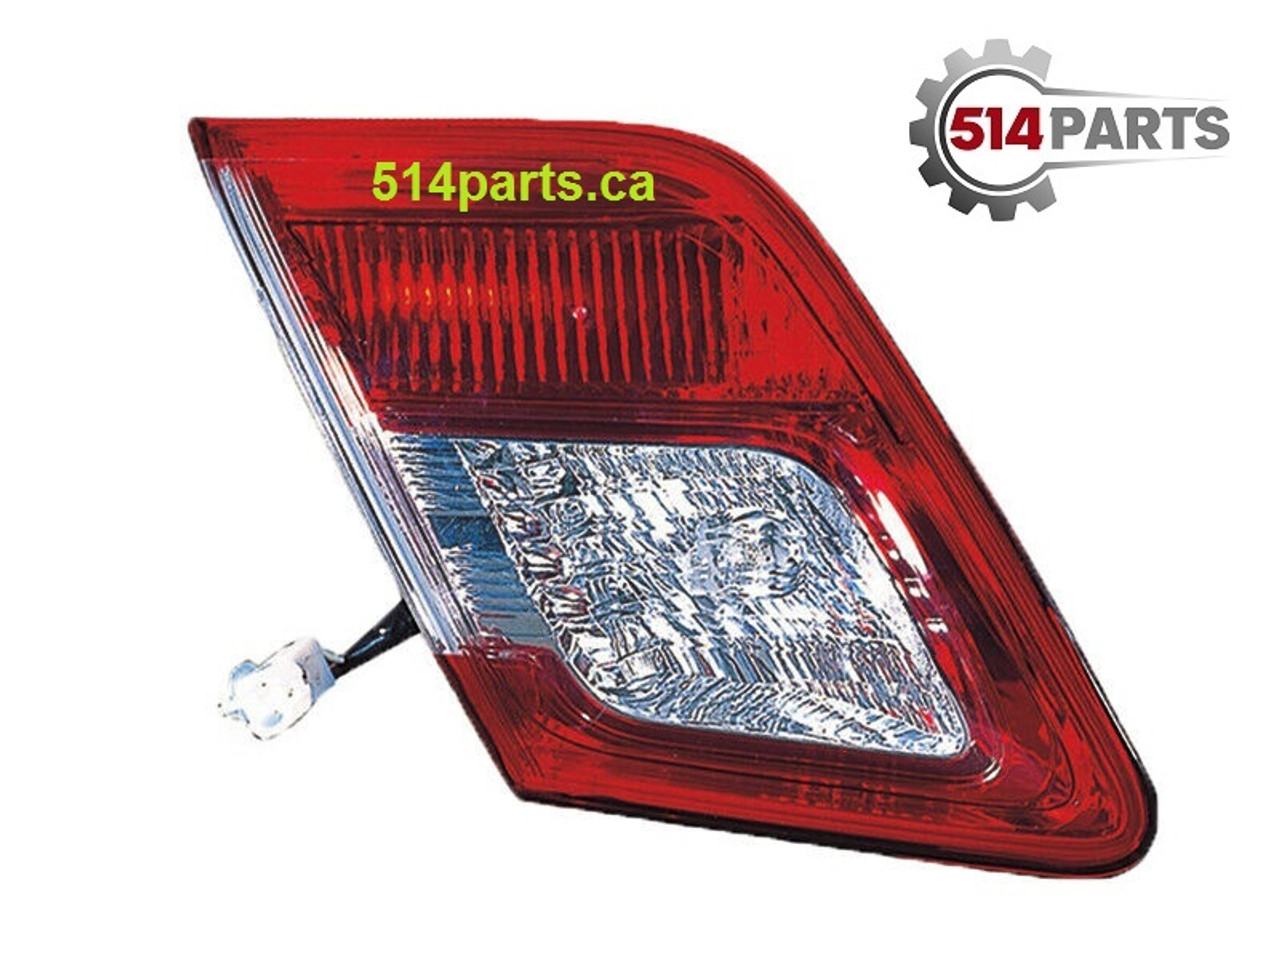 2010 - 2011 TOYOTA CAMRY USA BUILT MODELS Inner TAIL LIGHTS(BACK-UP LAMP) High Quality - PHARES ARRIERE Interne(LAMPE DE RECUL) Haute Qualite